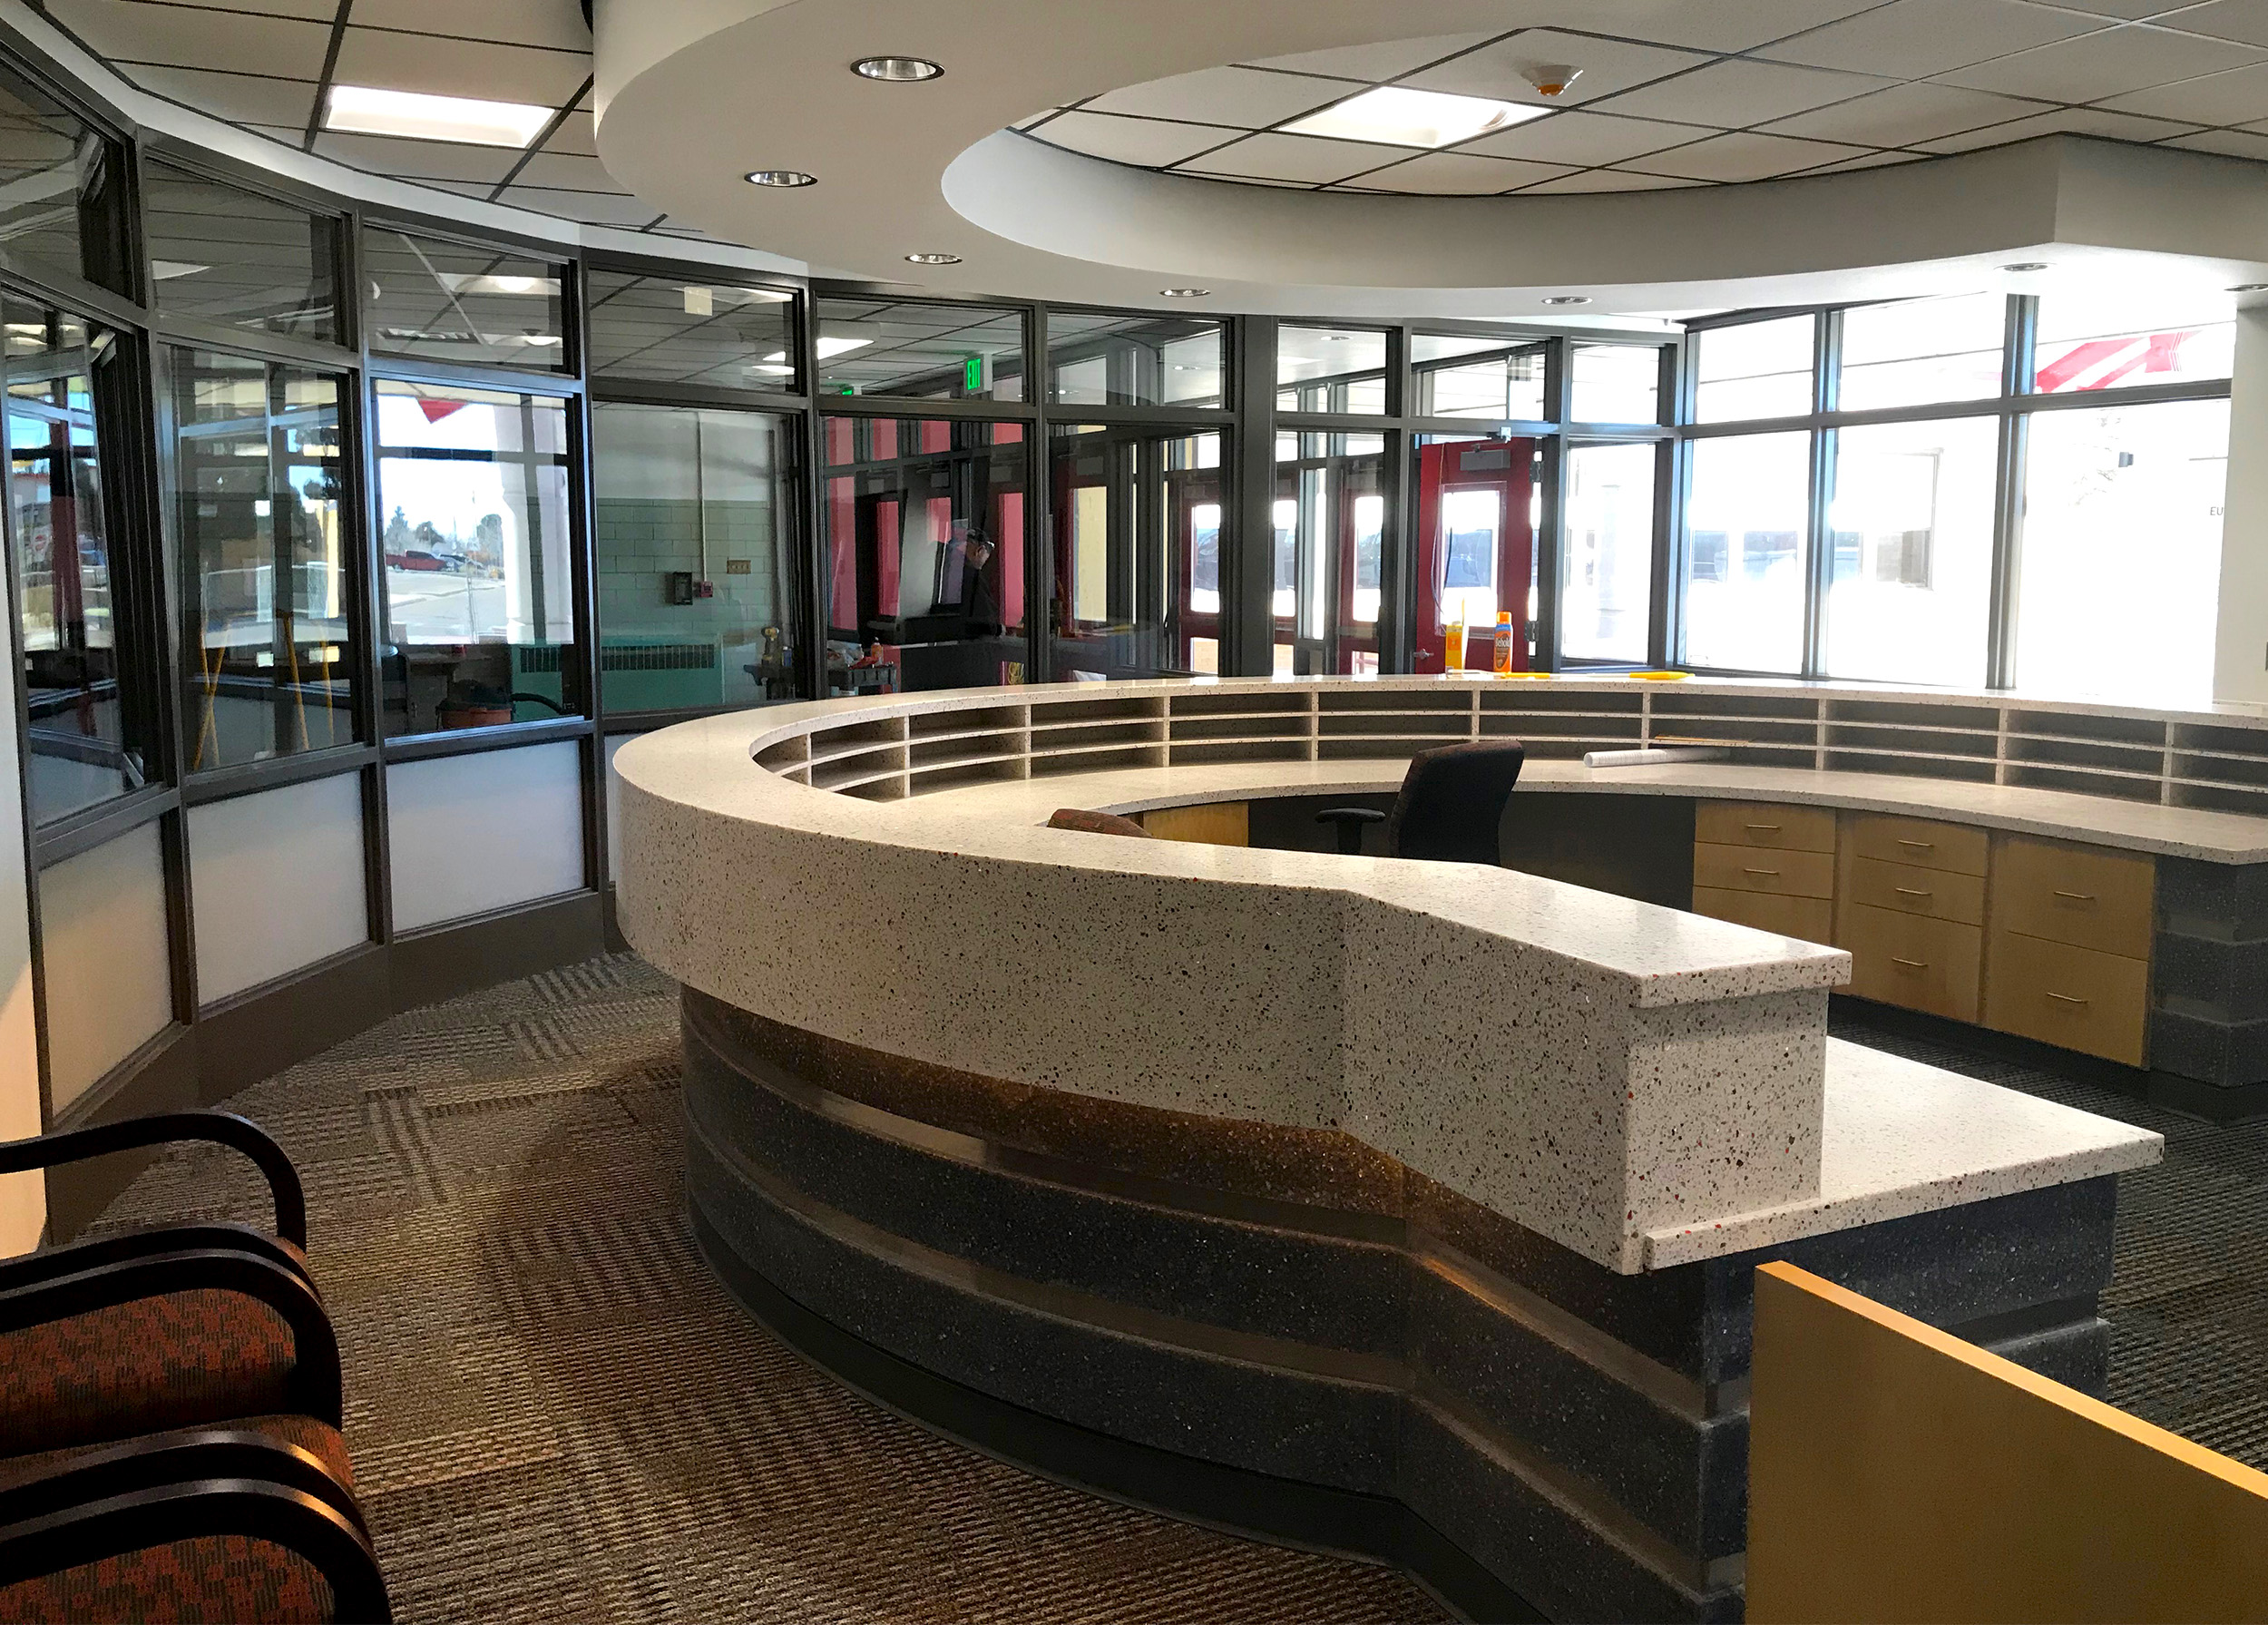 Wilson & Company incorporated an entry security vestibule using the admin as the control point for access in a safe manner for visitors and students. 

